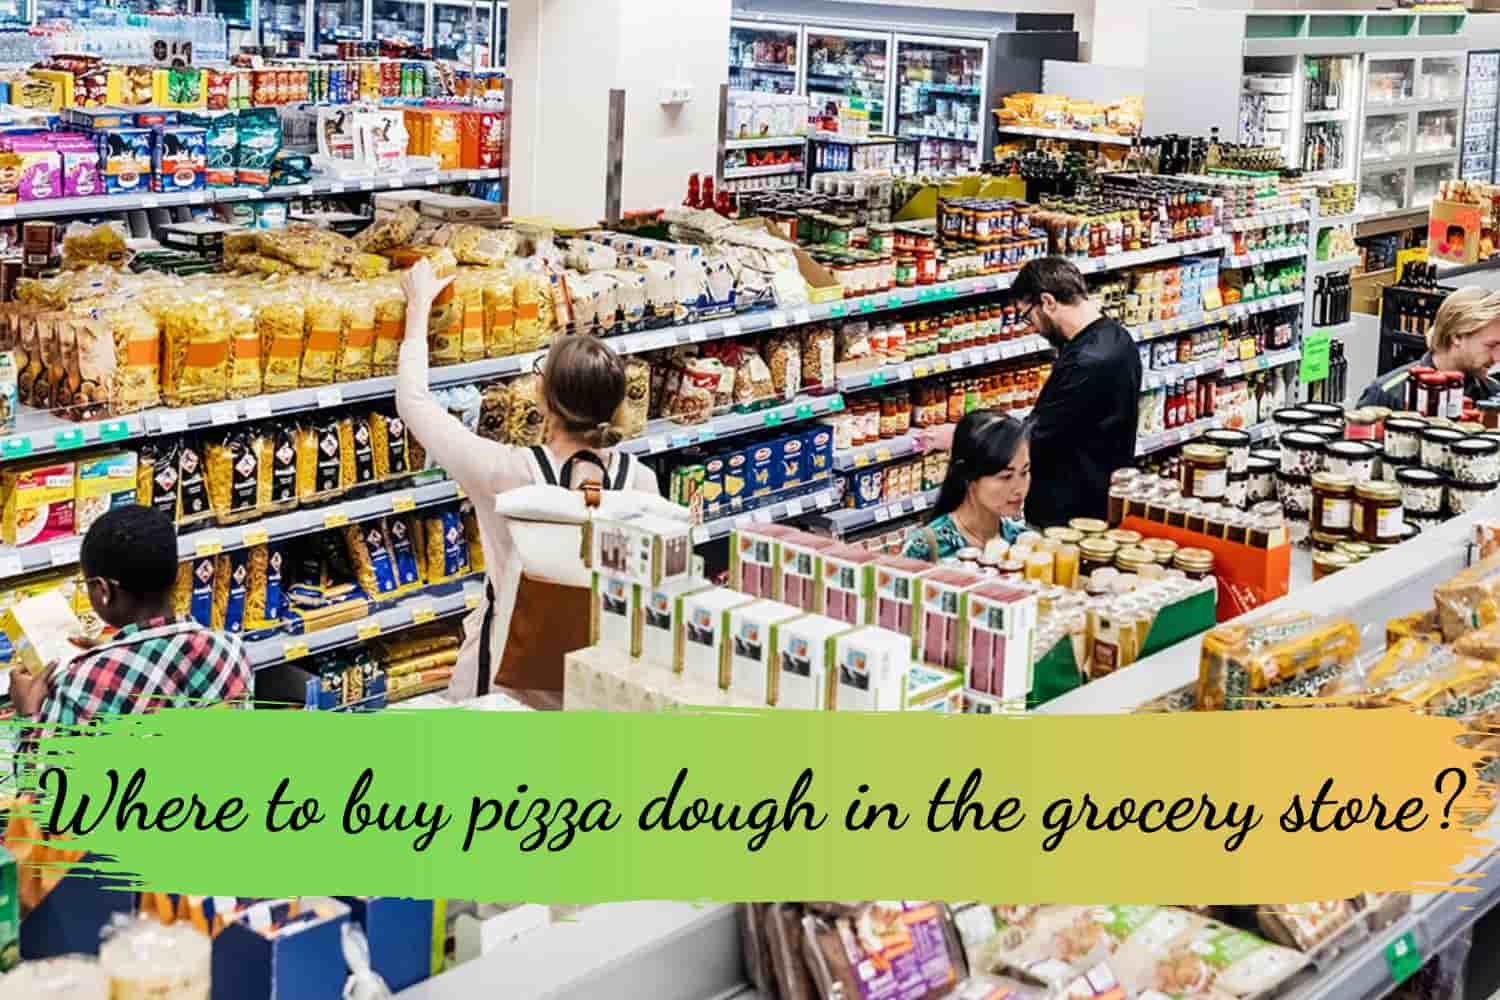 Where to buy pizza dough in the grocery store?